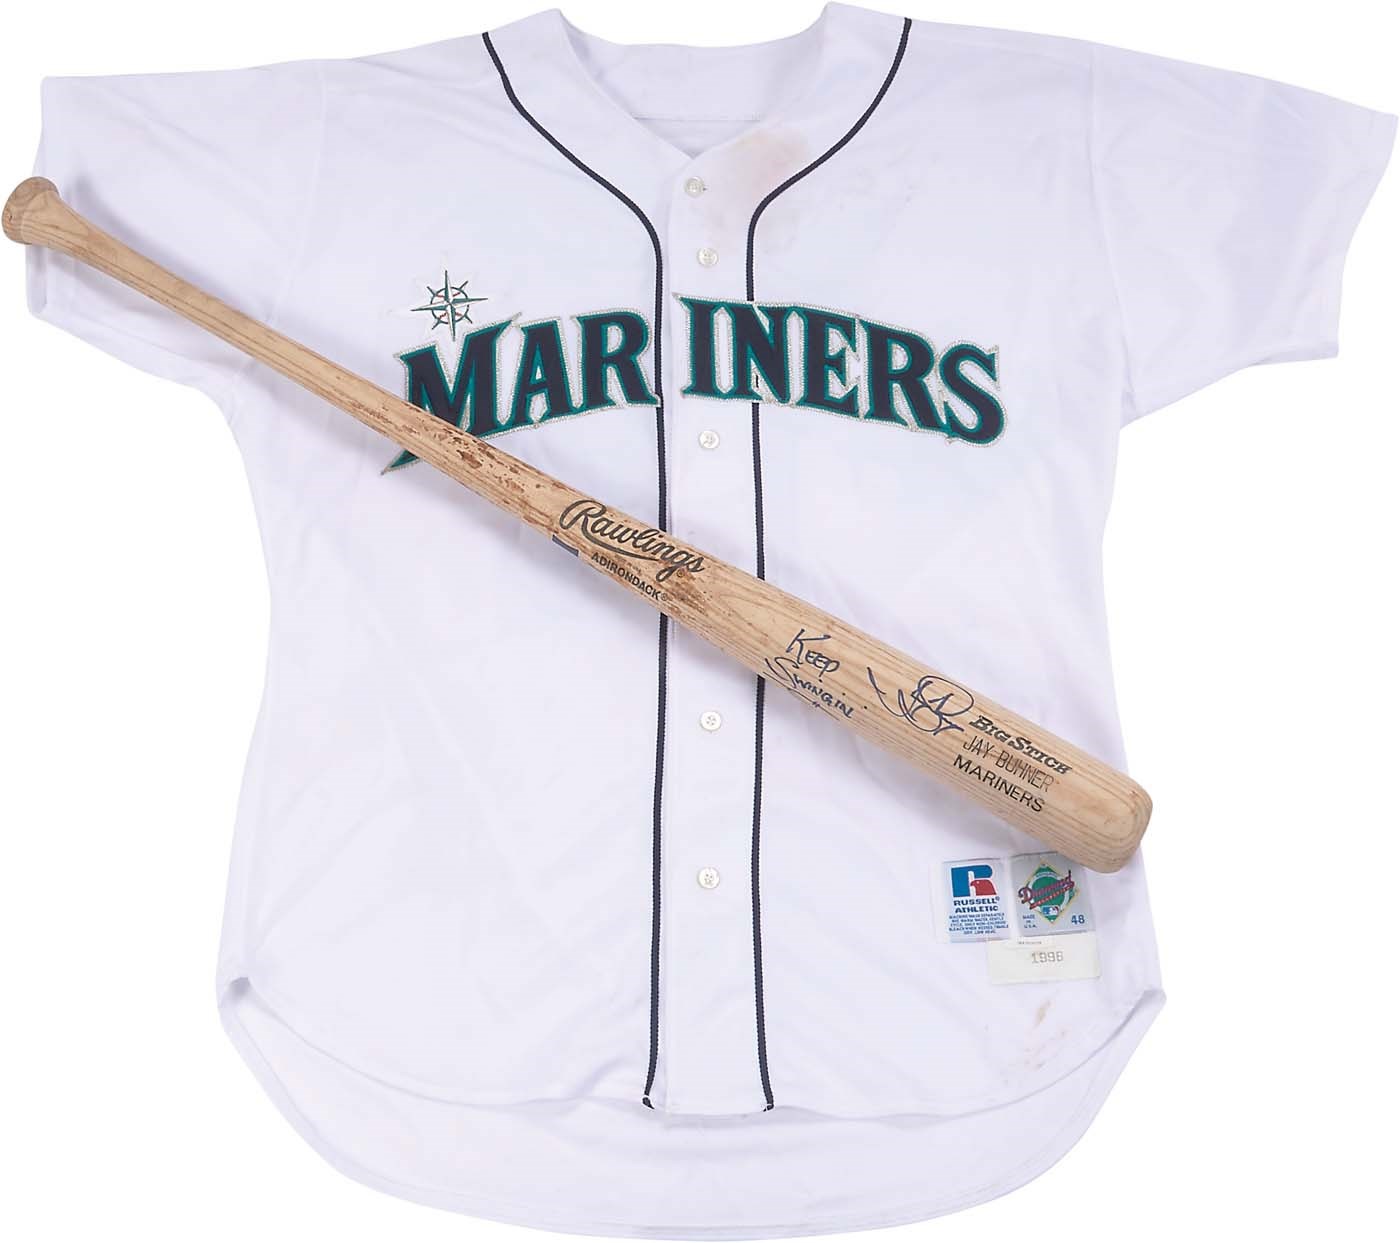 The 1984 USA Baseball Olympian Collection - 1996 Jay Buhner Signed Game Used Mariners Jersey & Bat - Gifted to Teammate